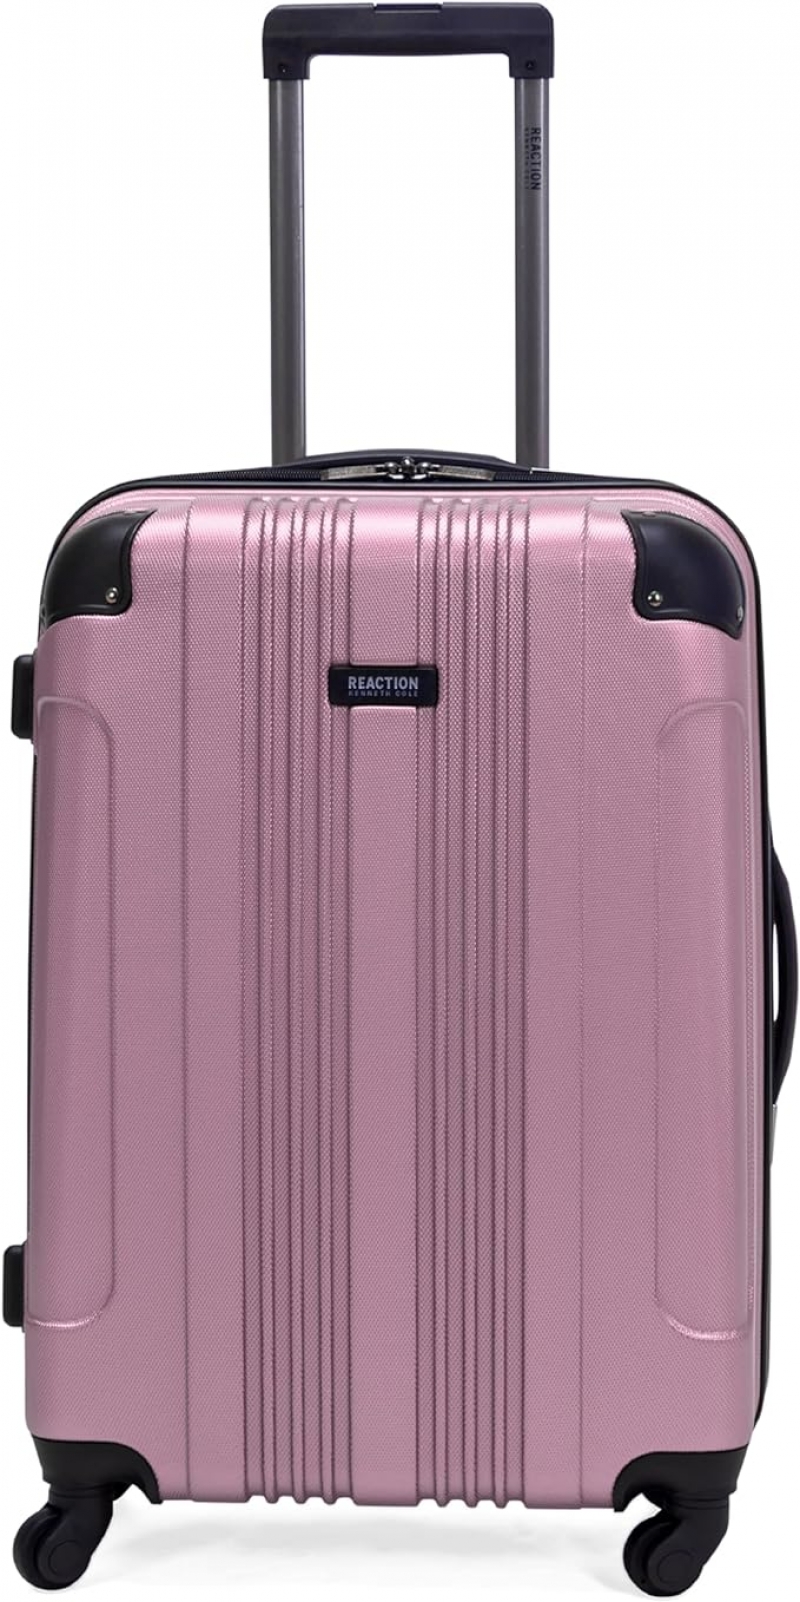 ihocon: Kenneth Cole REACTION Out of Bounds Lightweight Hardshell 4-Wheel Spinner Luggage, Blush, 24吋硬殼行李箱